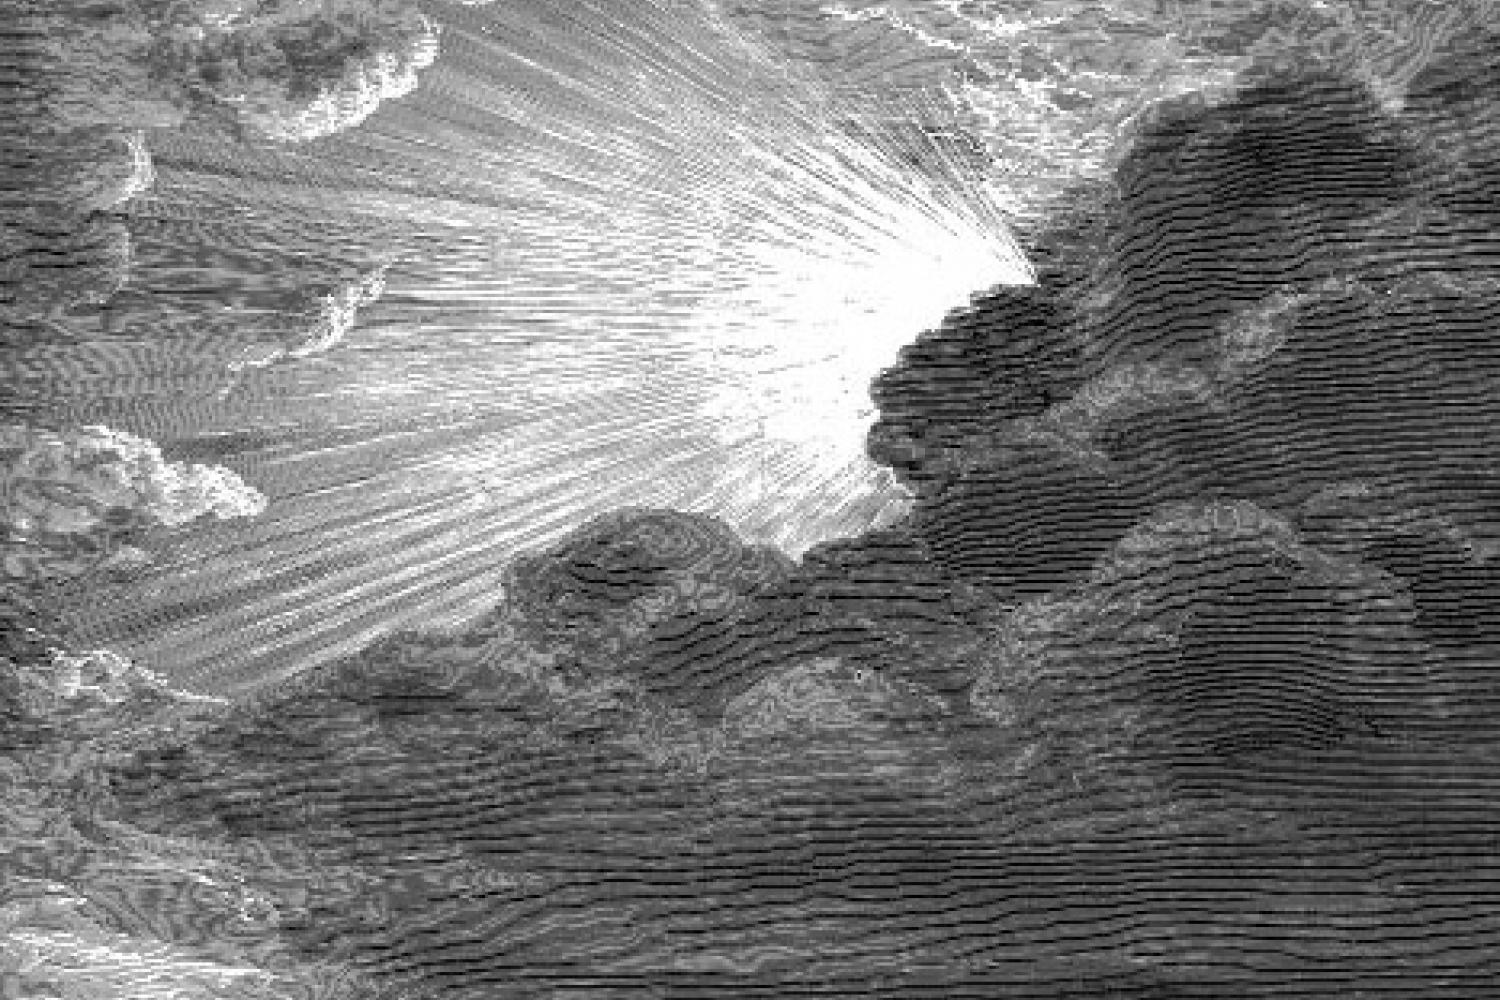 &quot;The Creation of Light,&quot; by Gustave Dore